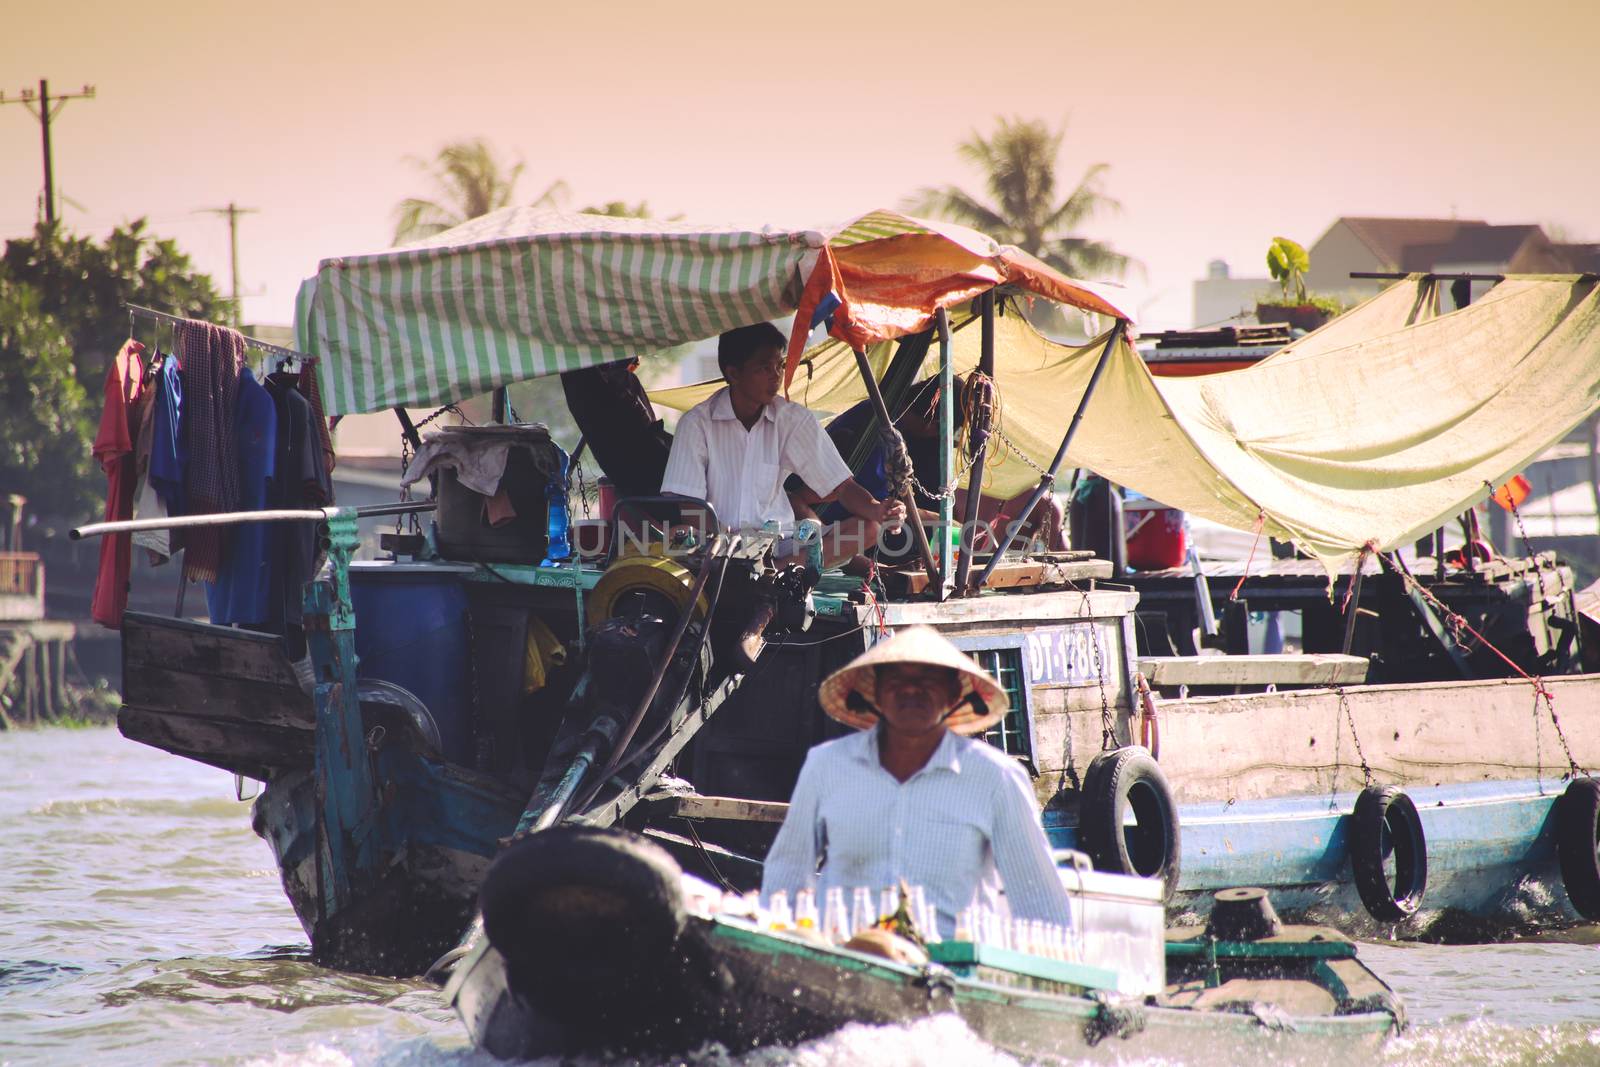 Editorial. Food vendors selling Vietnamese noodle soups in small wooden boats by Sonnet15